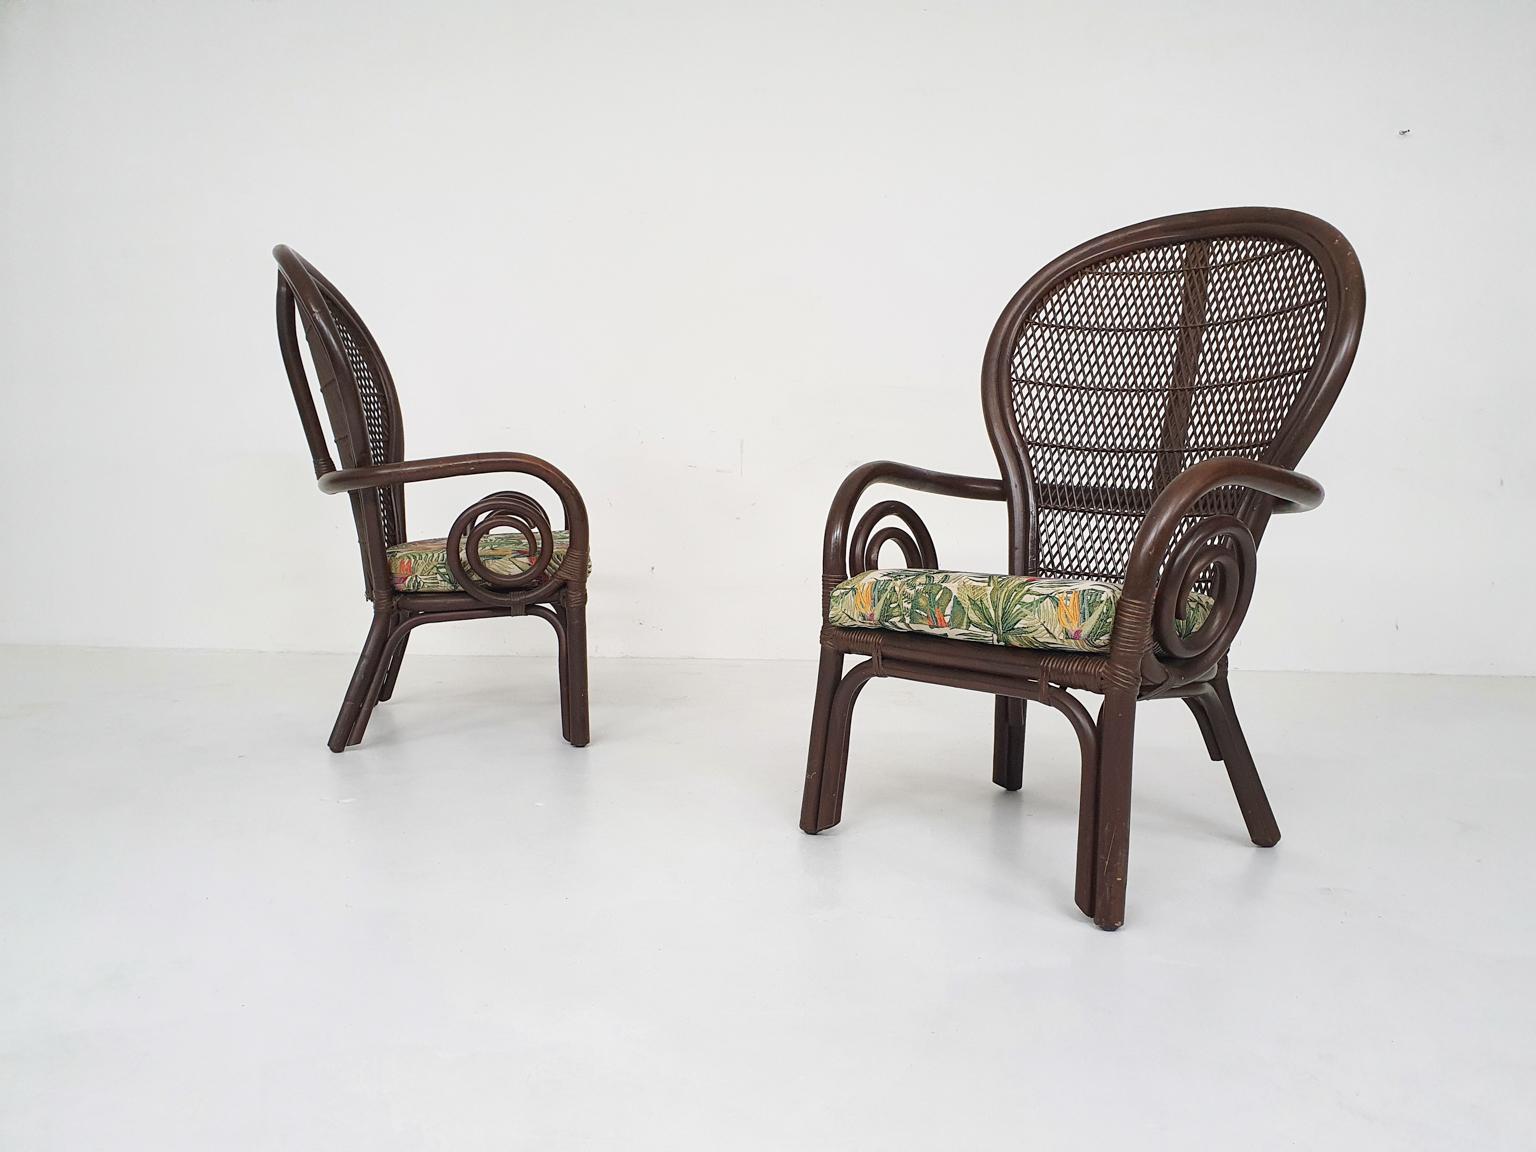 Midcentury dark brown manou lounge chairs. The seating cushions have new upholstery with a botanical flower pattern. Very nice for in your orangery, on your porch or for outdoor.